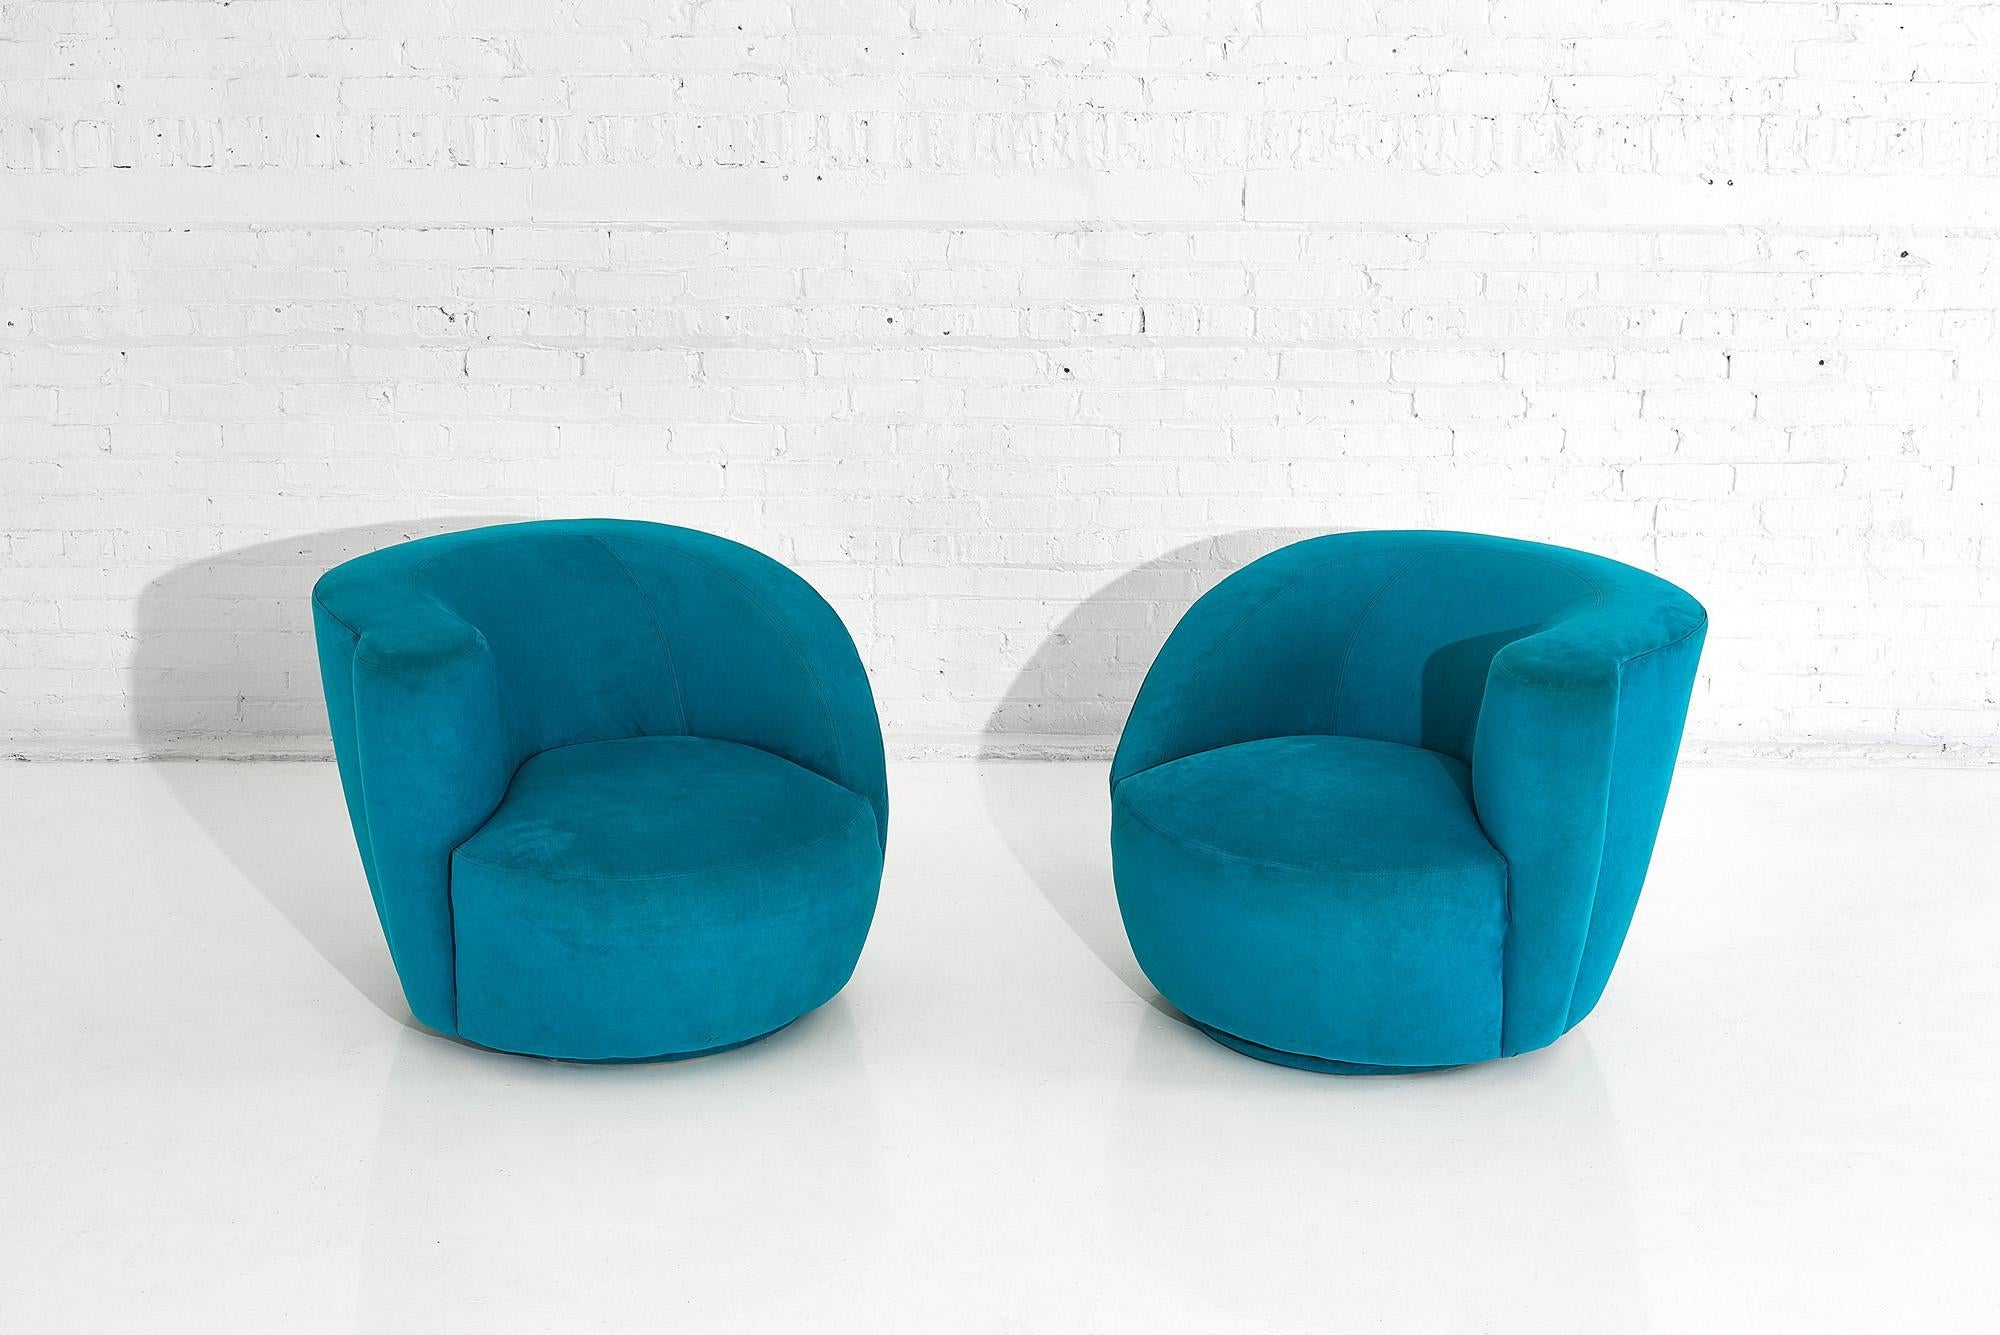 Pair of Vladimir Kagan for Directional “Nautilus” swivel chairs. Original upholstery in very good condition.